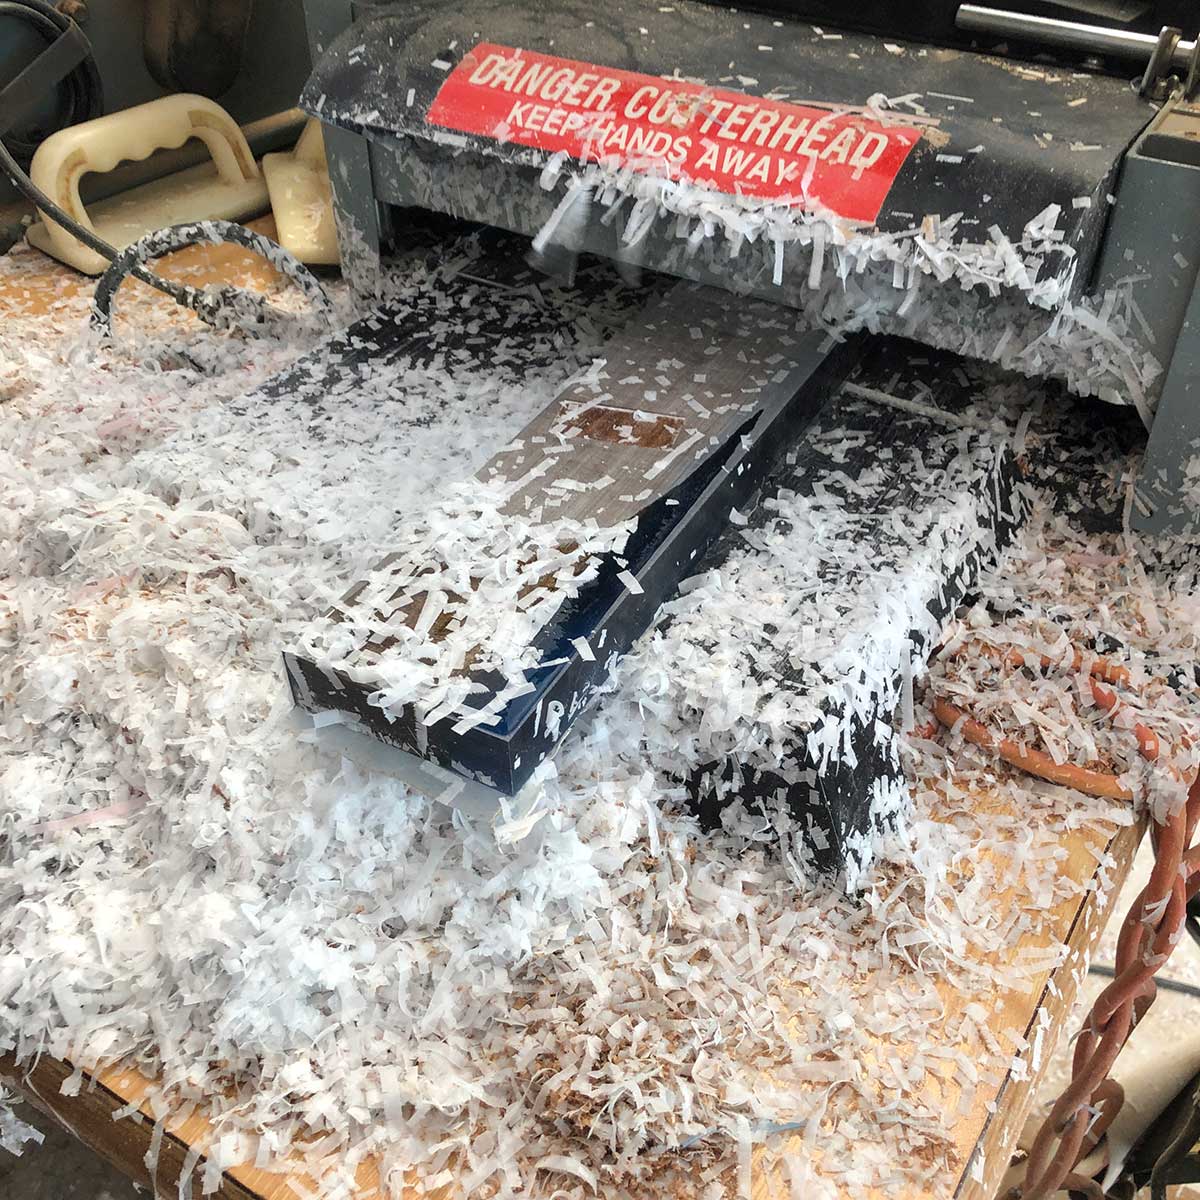 creating lots of epoxy resin shavings while flattening an acacia live edge and epoxy resin magnetic knife rack using a benchtop planer